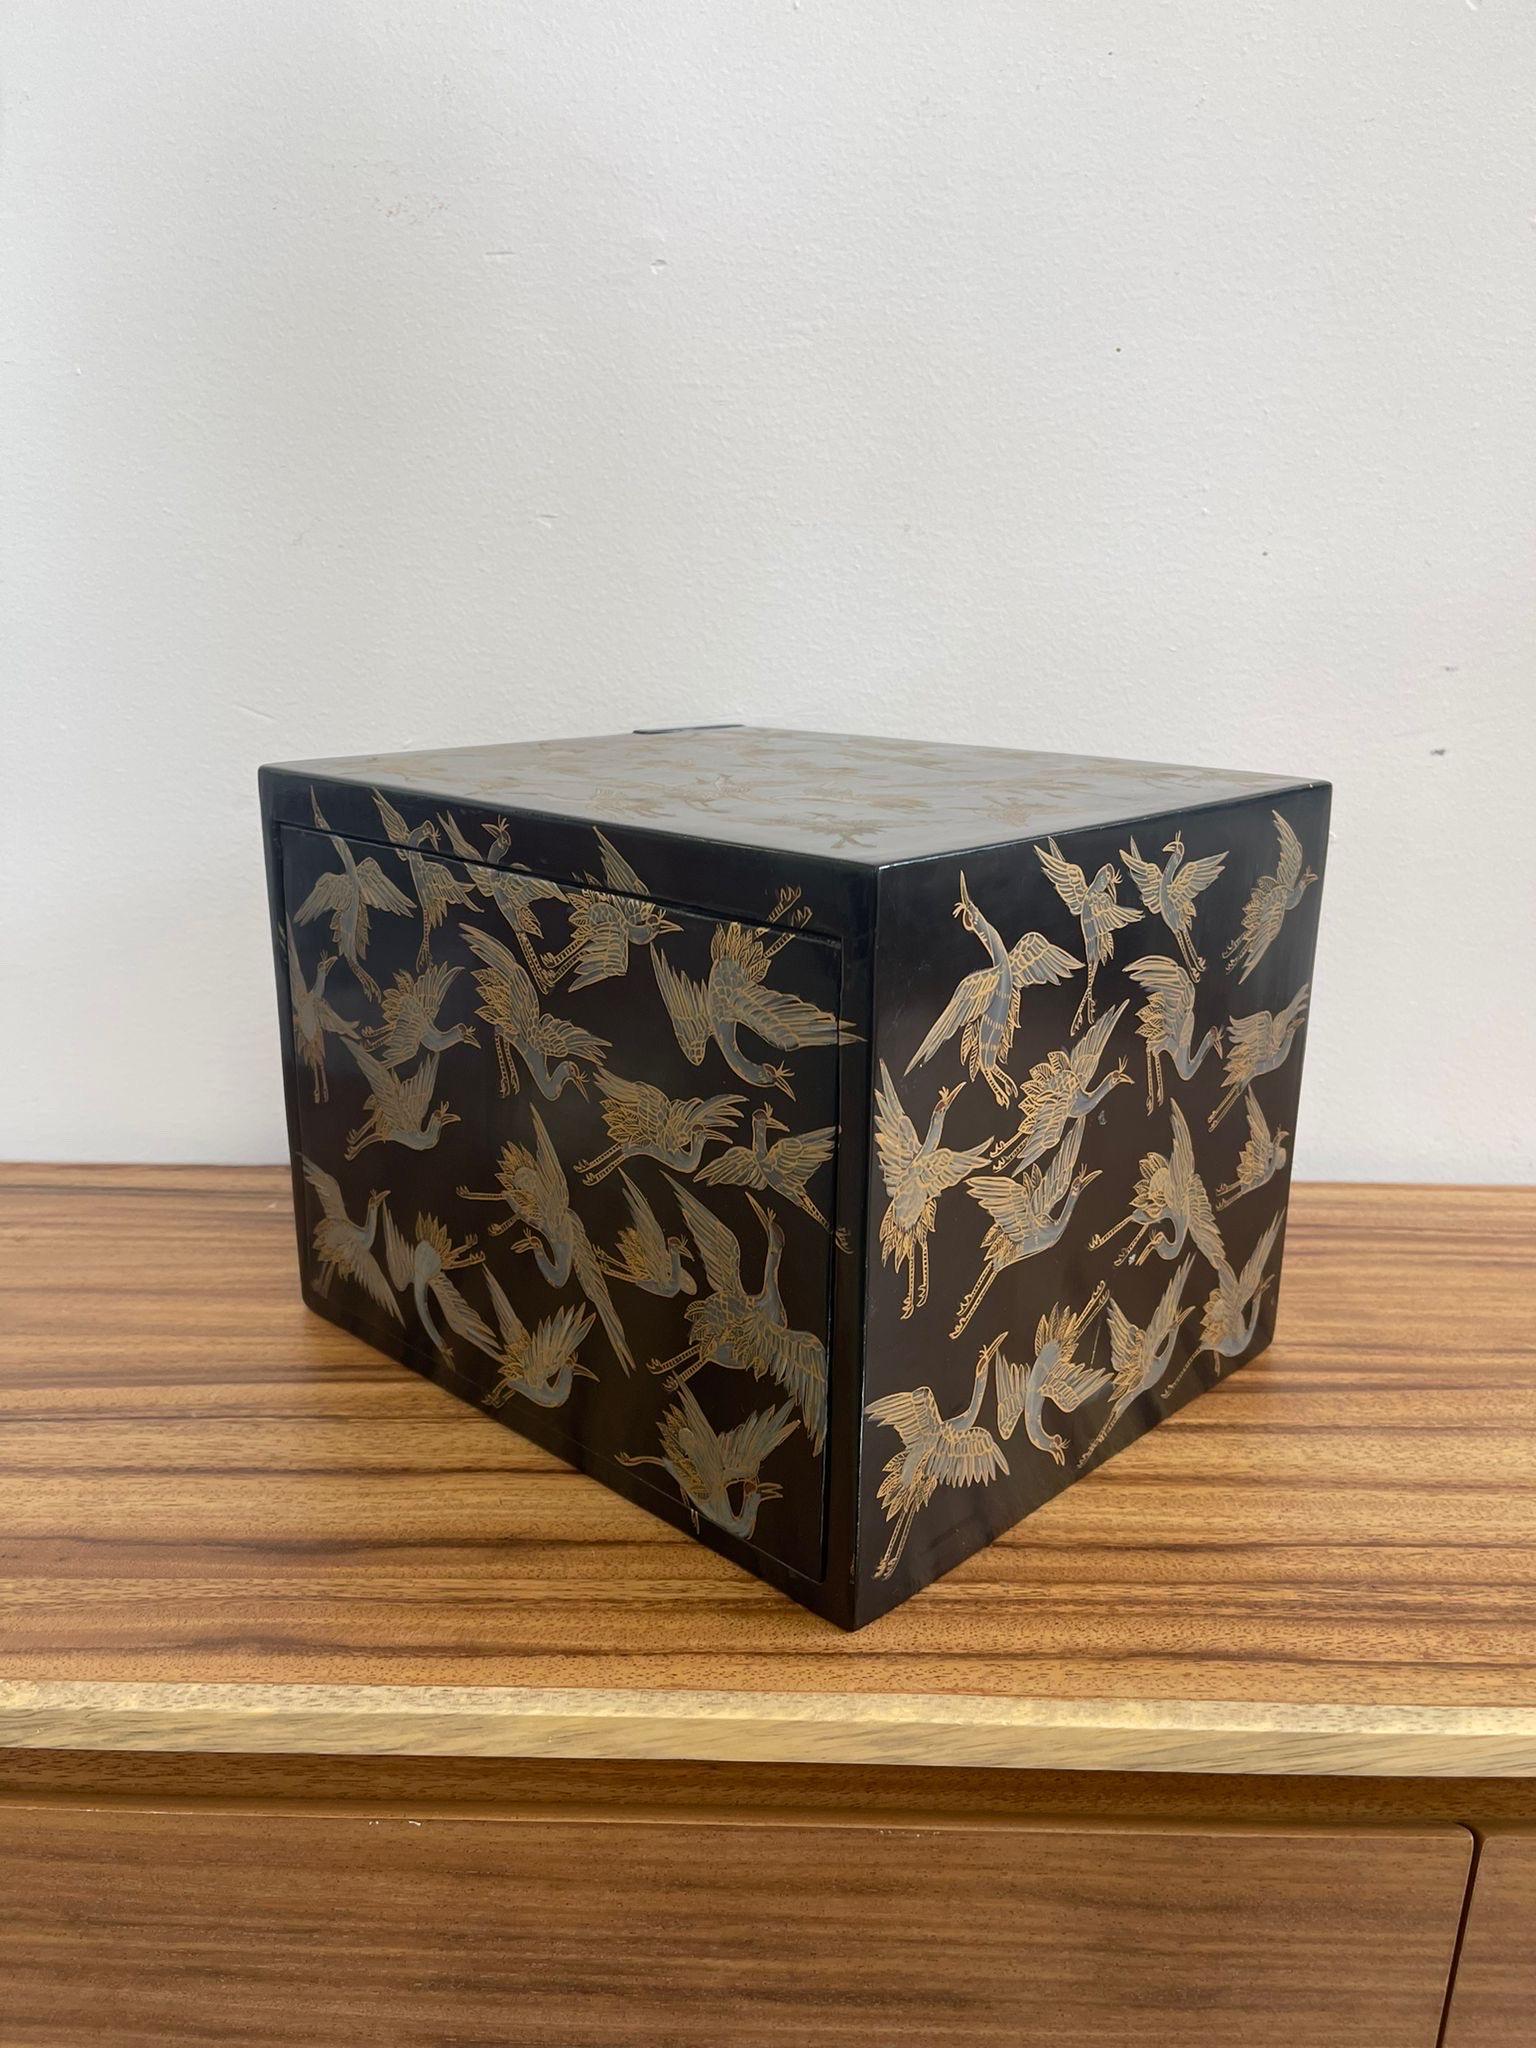 Mid-Century Modern Japanese Storage Box With Hidden Compartments and Crane Motif.